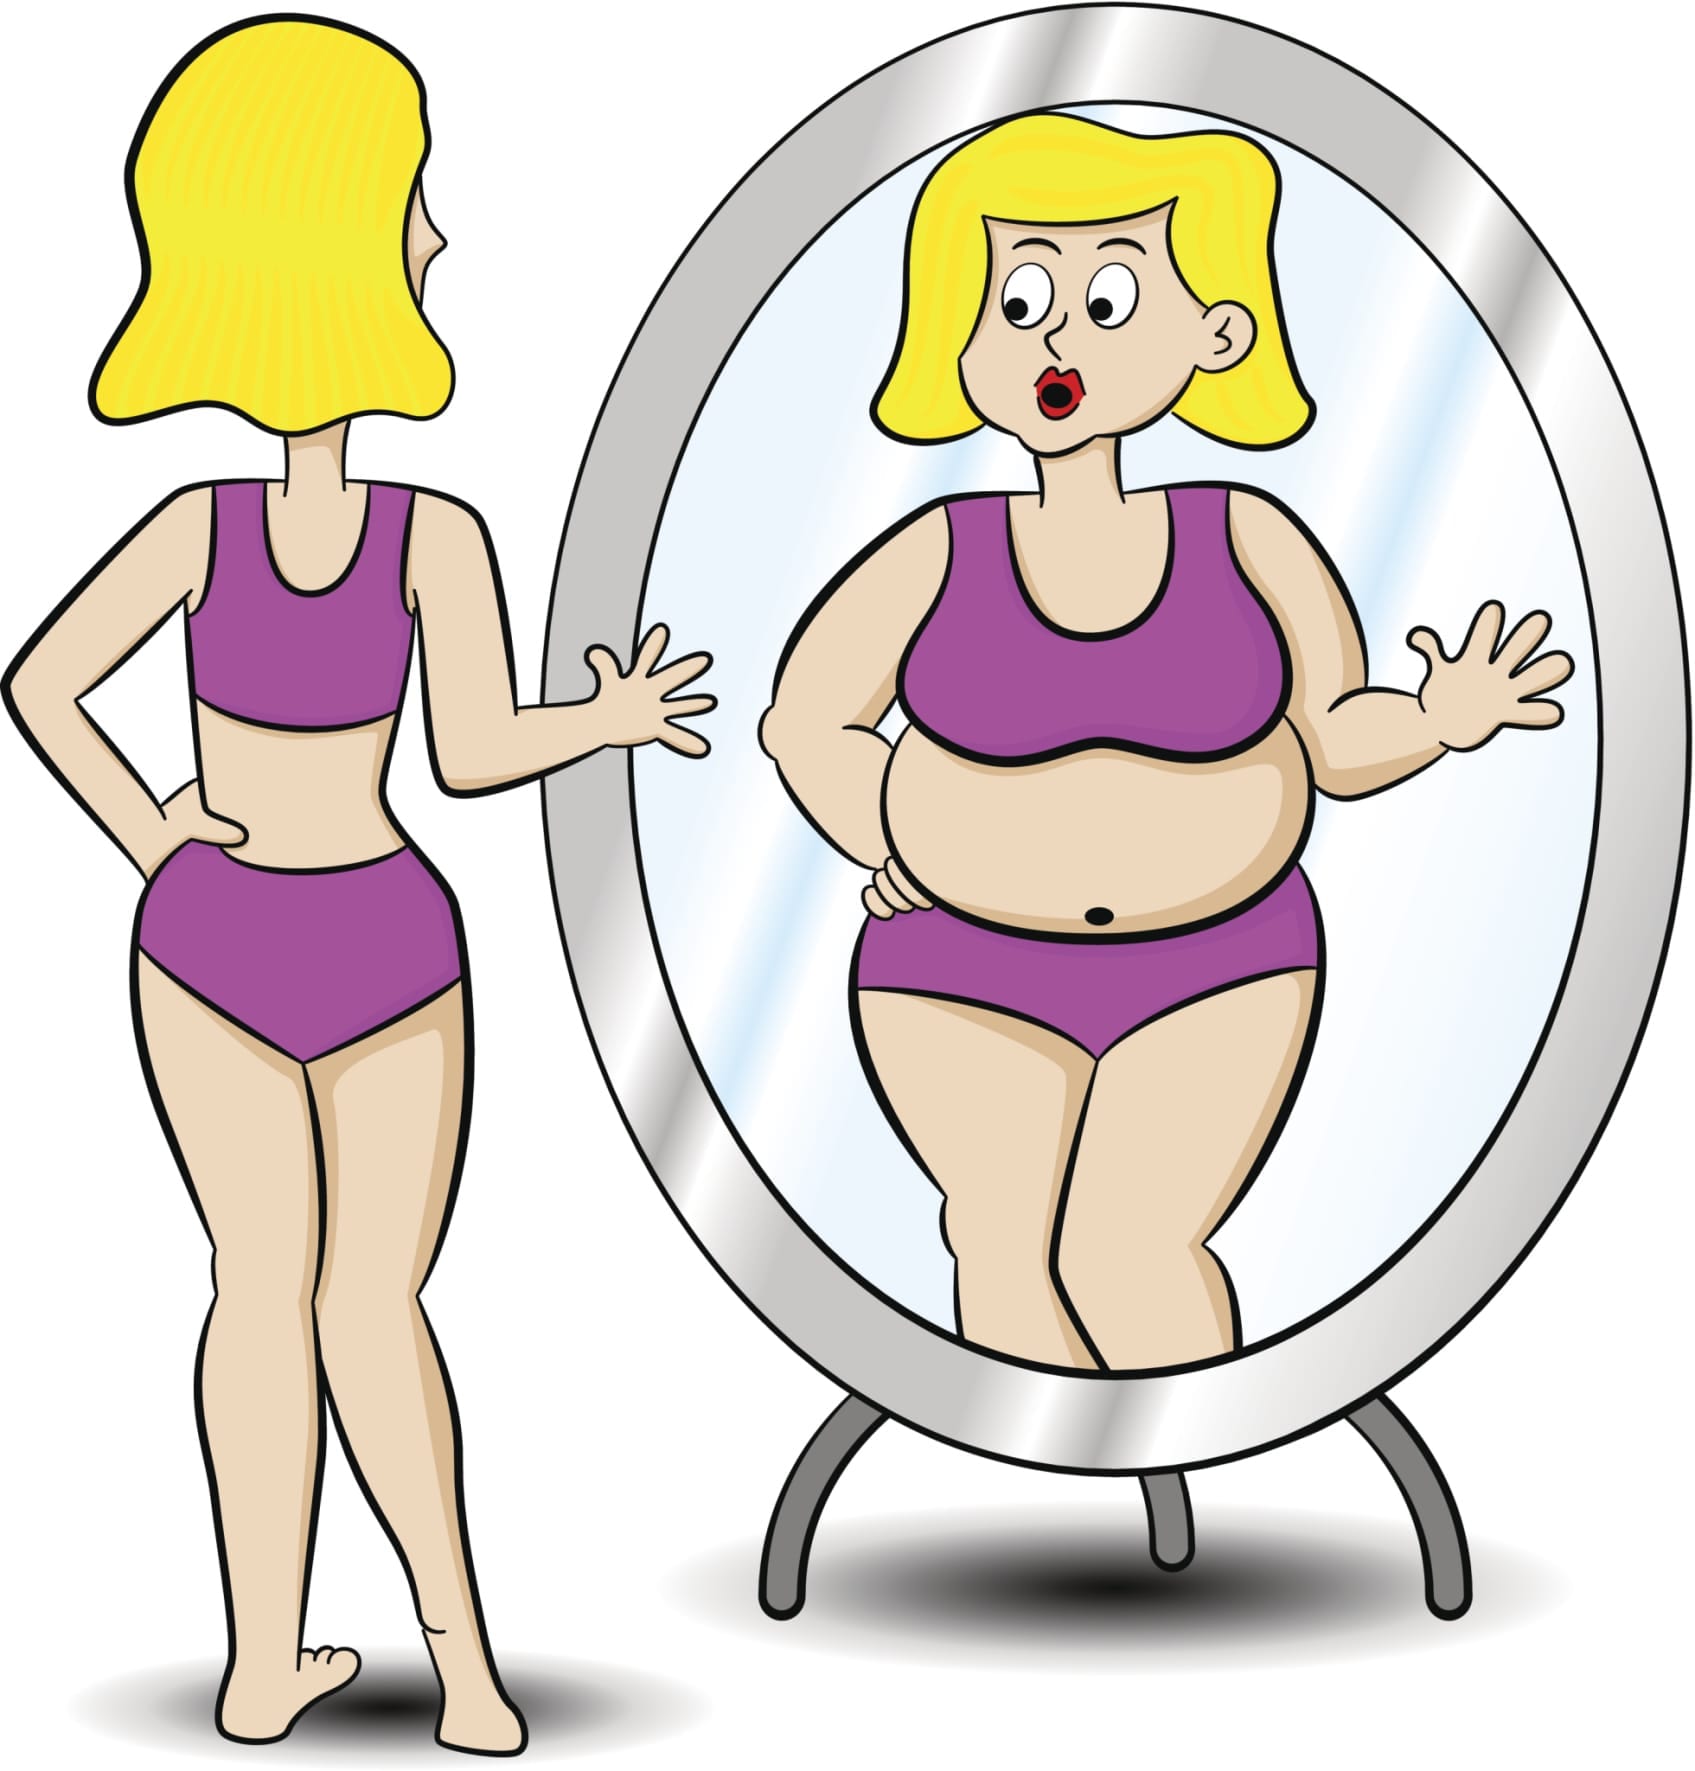 Do I Have An Eating Disorder? Take New Online Test 